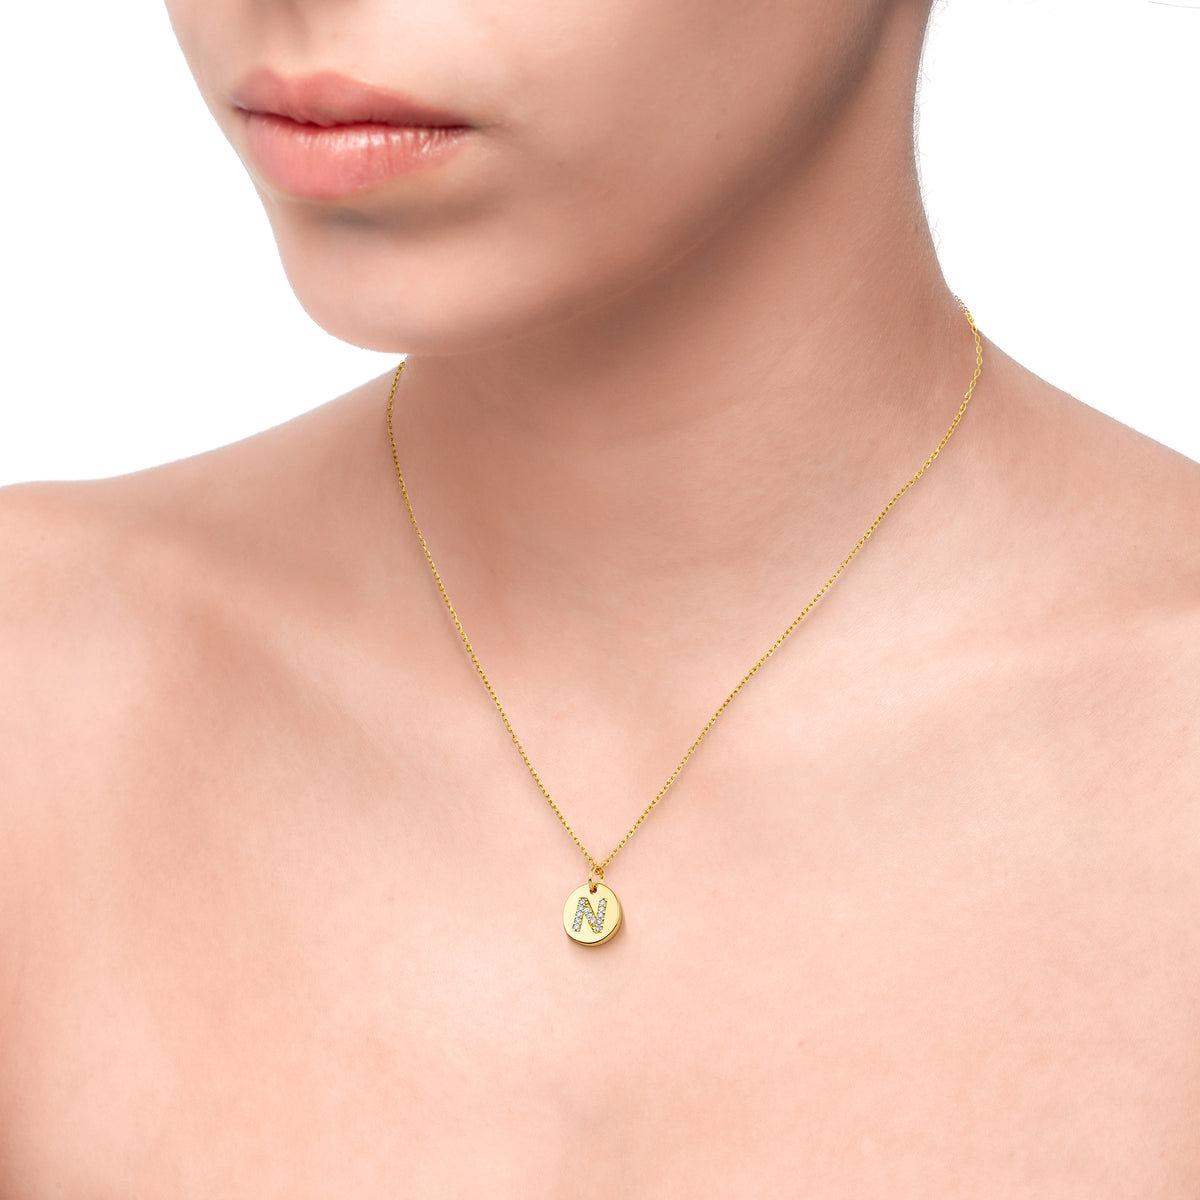 Magna | N Letter Necklace | White CZ | 18K Gold Plated 925 Silver